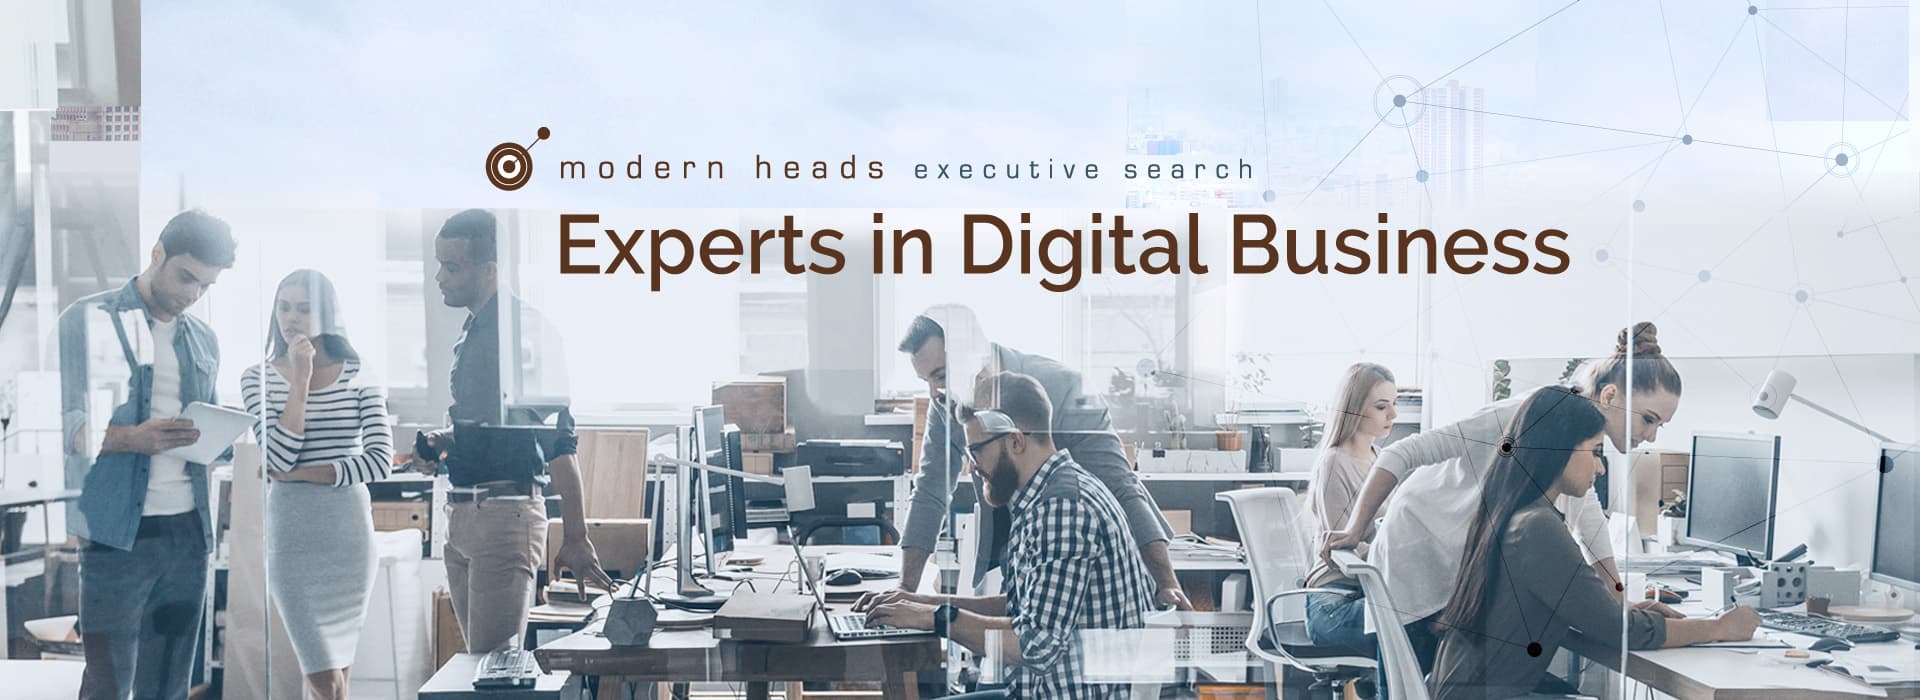 modern heads executive search - Experts in Digital Business